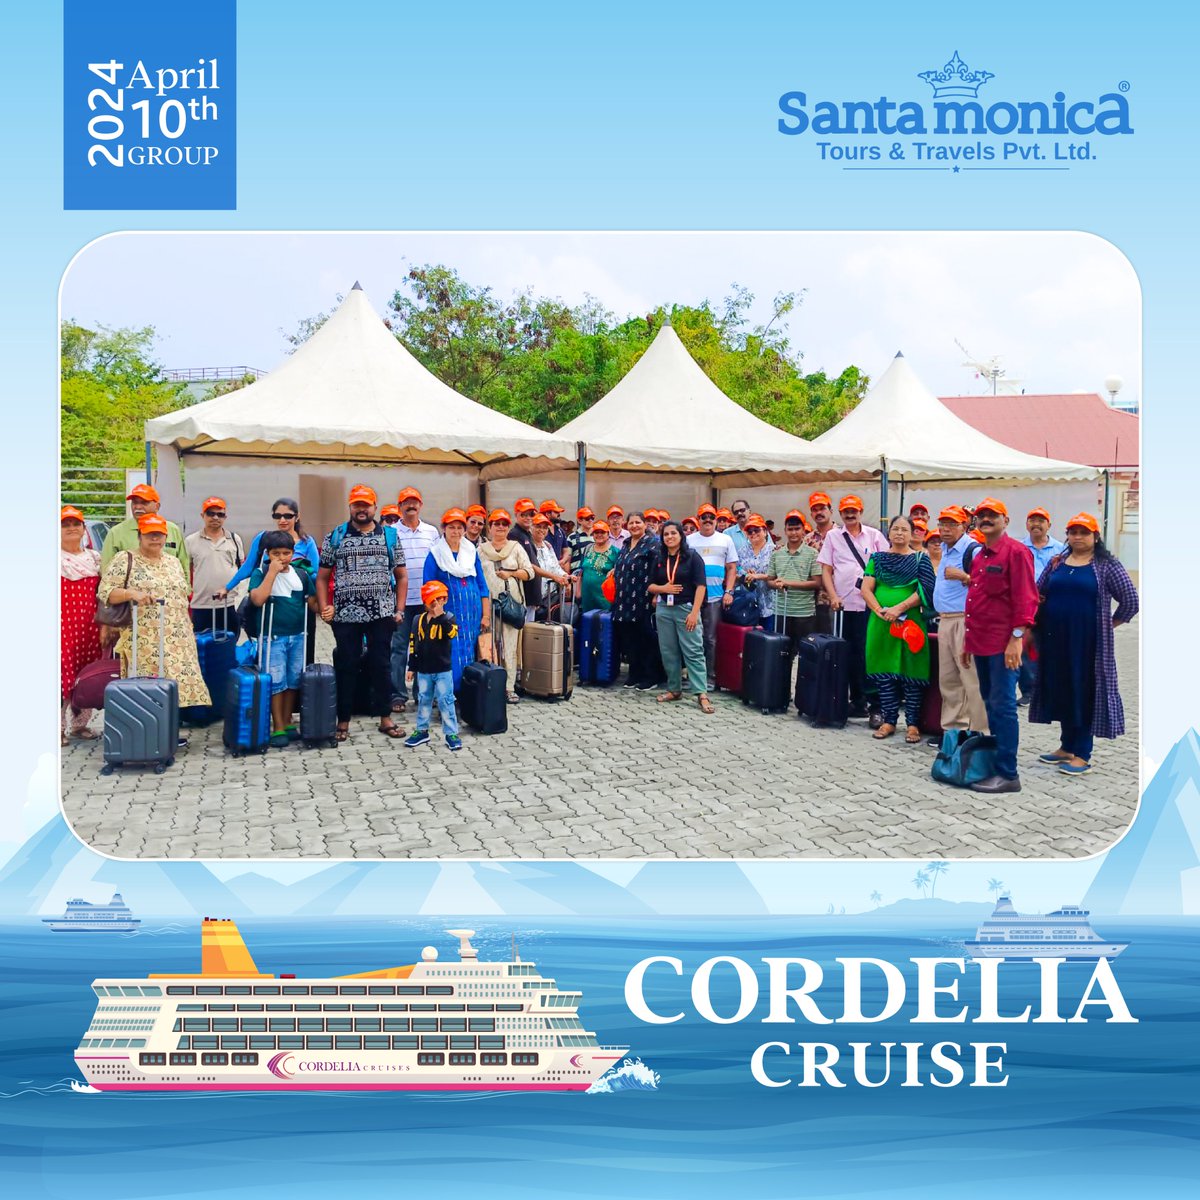 🚢✨Smooth sails, endless smiles! Our Cordelia Cruise group tour concluded with unforgettable memories and new friendships.

Here's to the adventure that brought us together! 🚢✨ #CordeliaCruise #grouptourmemories